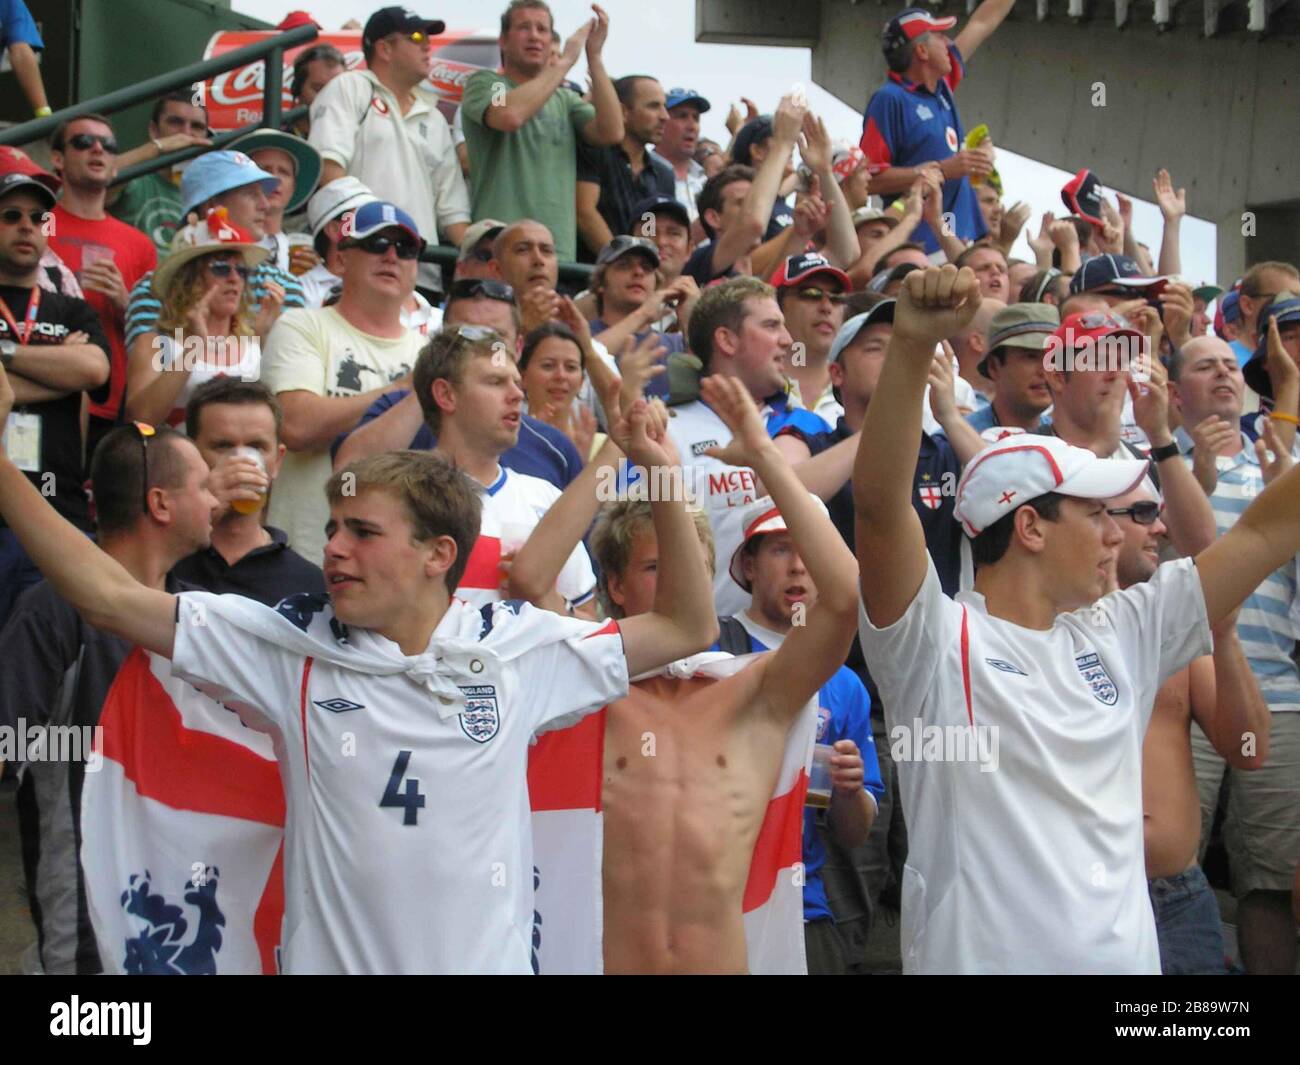 'English: England's en:Barmy Army. en:Sydney Cricket Ground, Tuesday 2 January 2007.; 3 January 2007 (original upload date); Transferred from en.wikipedia to Commons.; The original uploader was One Salient Oversight at English Wikipedia.; ' Stock Photo